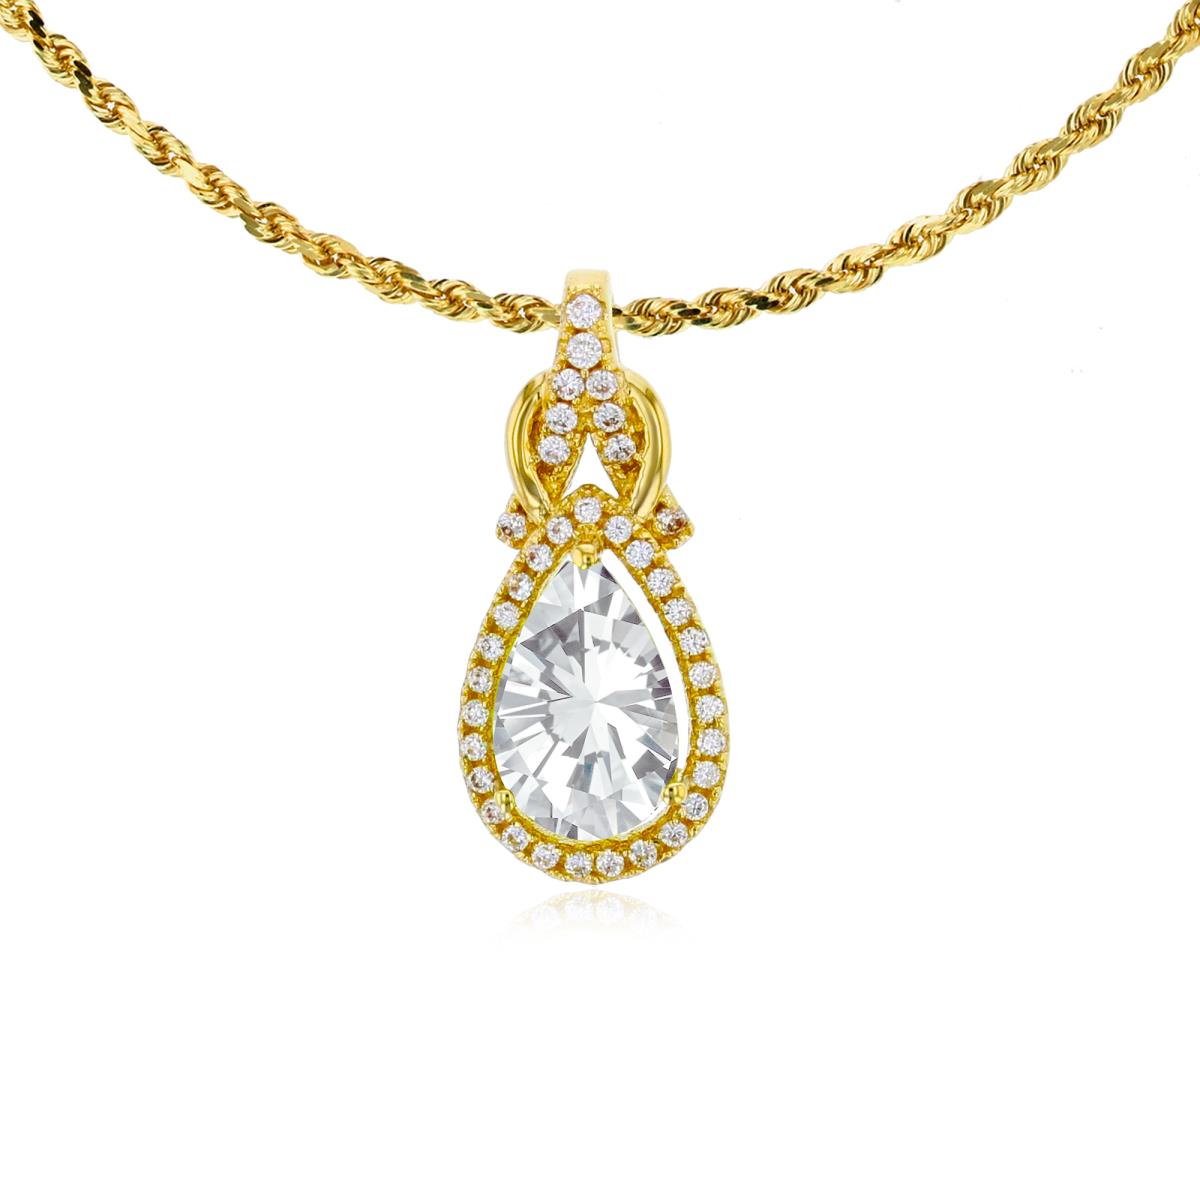 10K Yellow Gold 8x5mm Pear Cut White Topaz & 0.11 CTTW Rnd Diamond Knot 18" Rope Chain Necklace